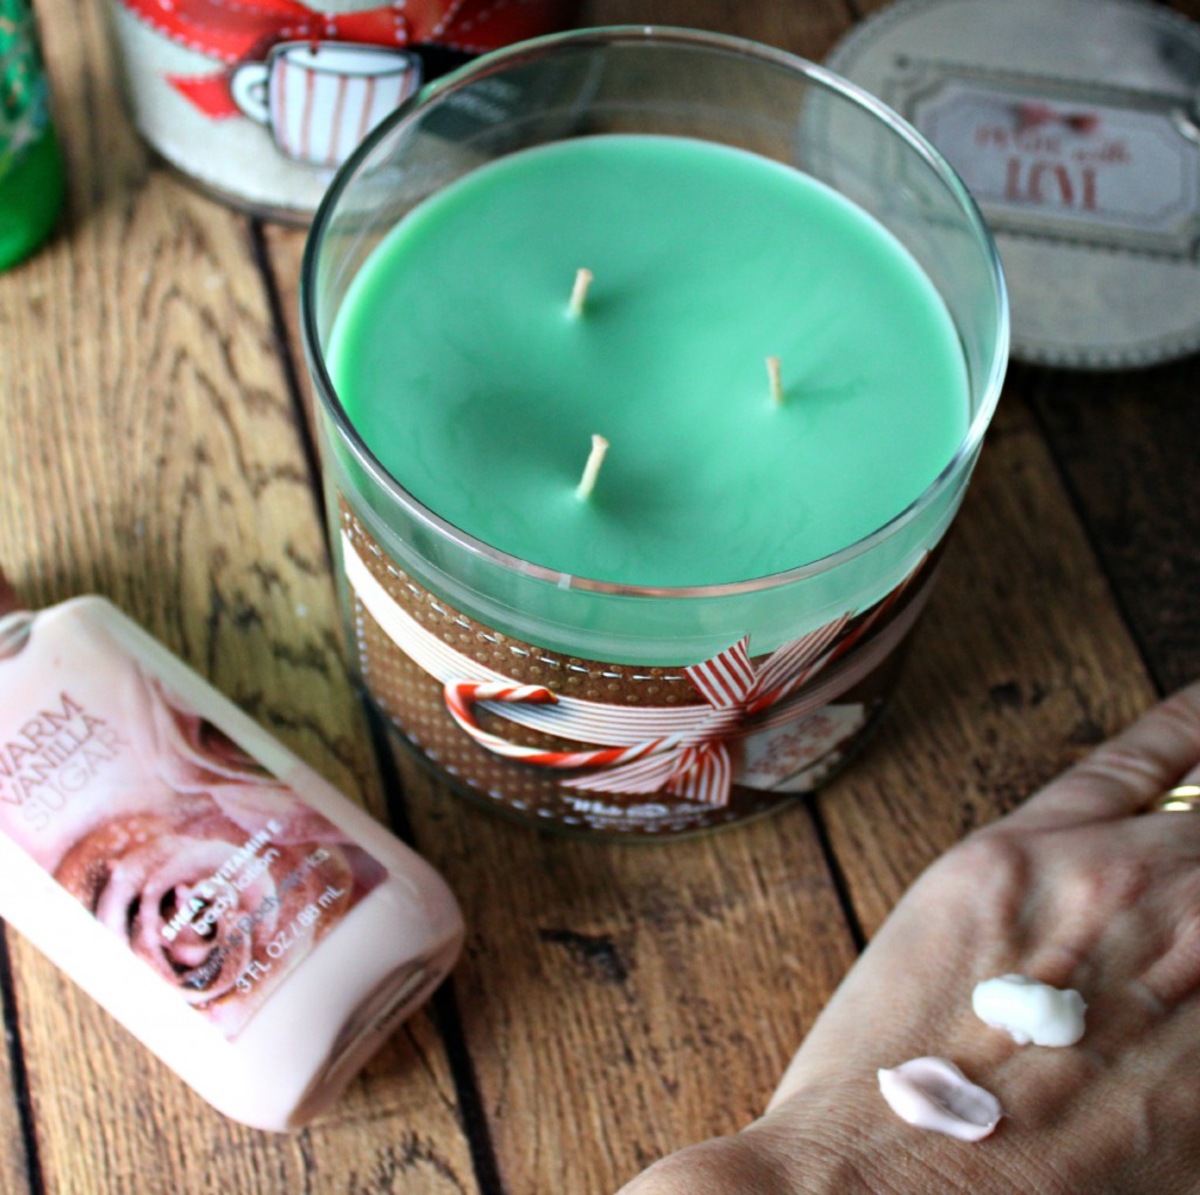 How To Mix Fragrances For Candles